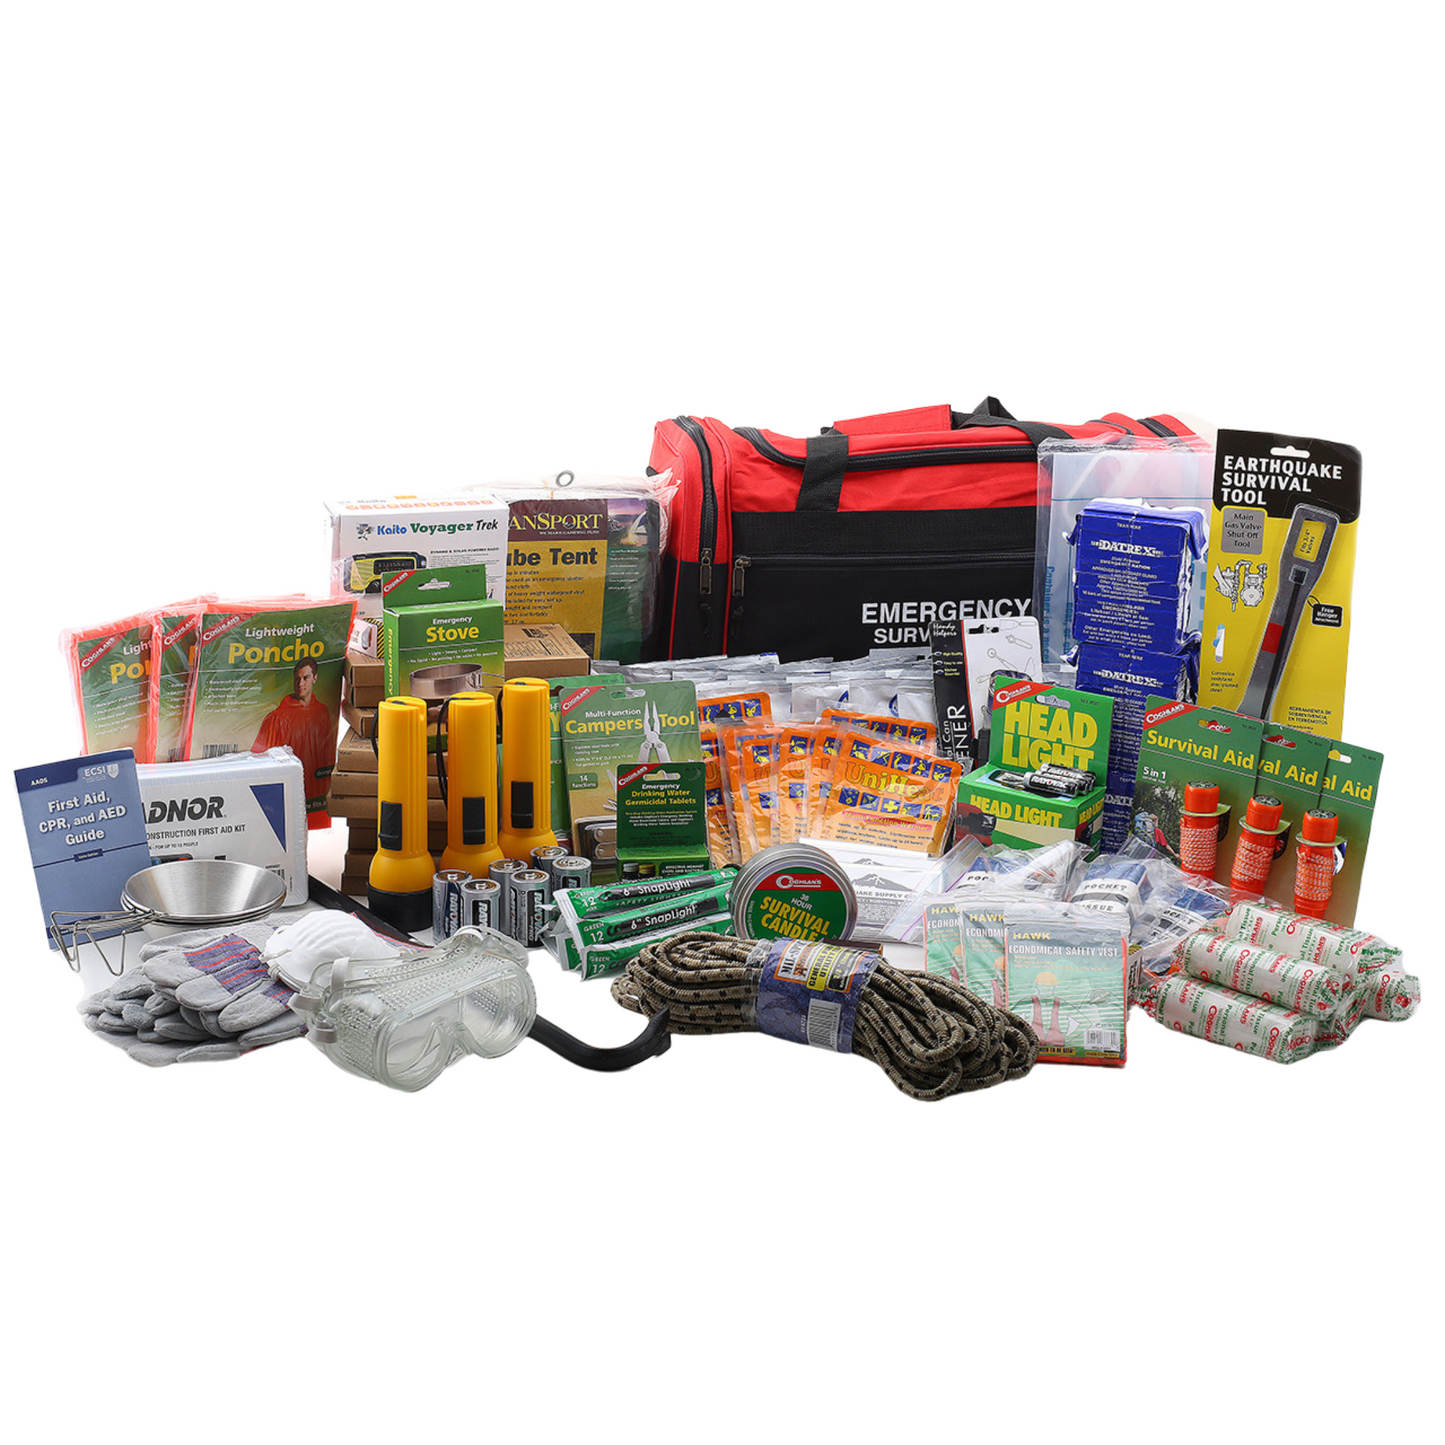 Emergency Survival Kits - 20 Person Deluxe Survival Kit